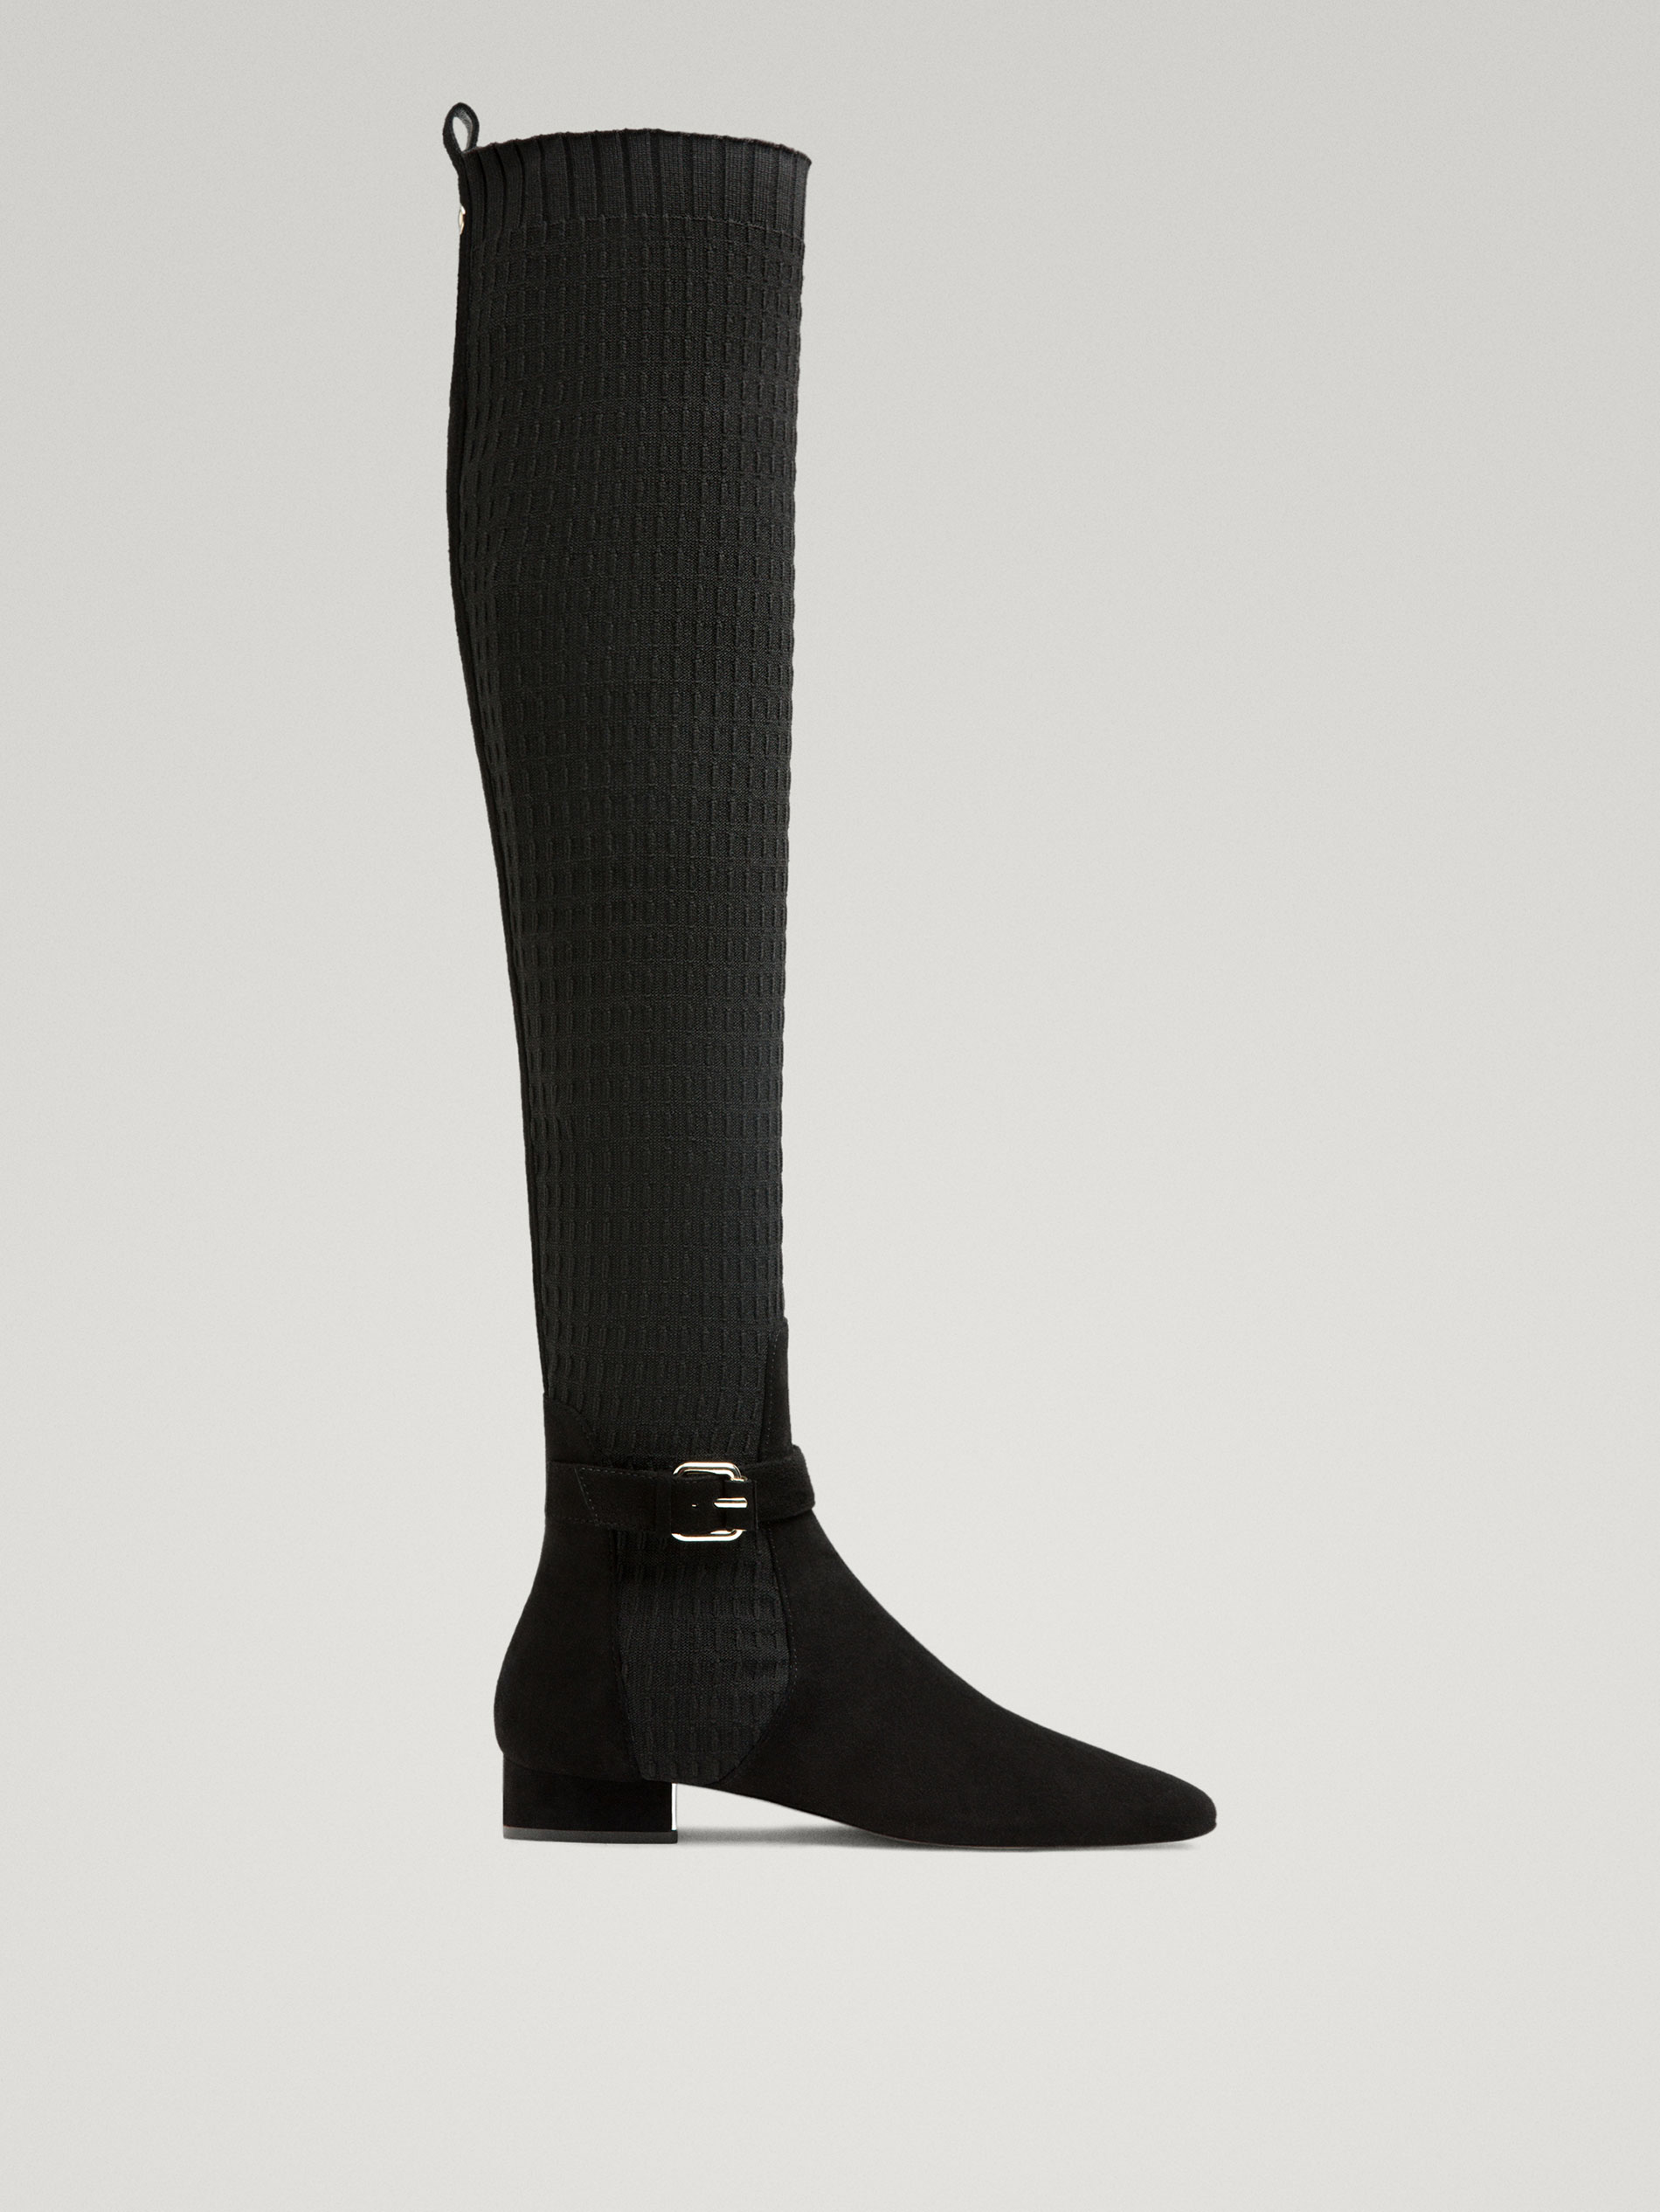 Massimo Dutti TALL BLACK FABRIC BOOTS at £139 | love the brands